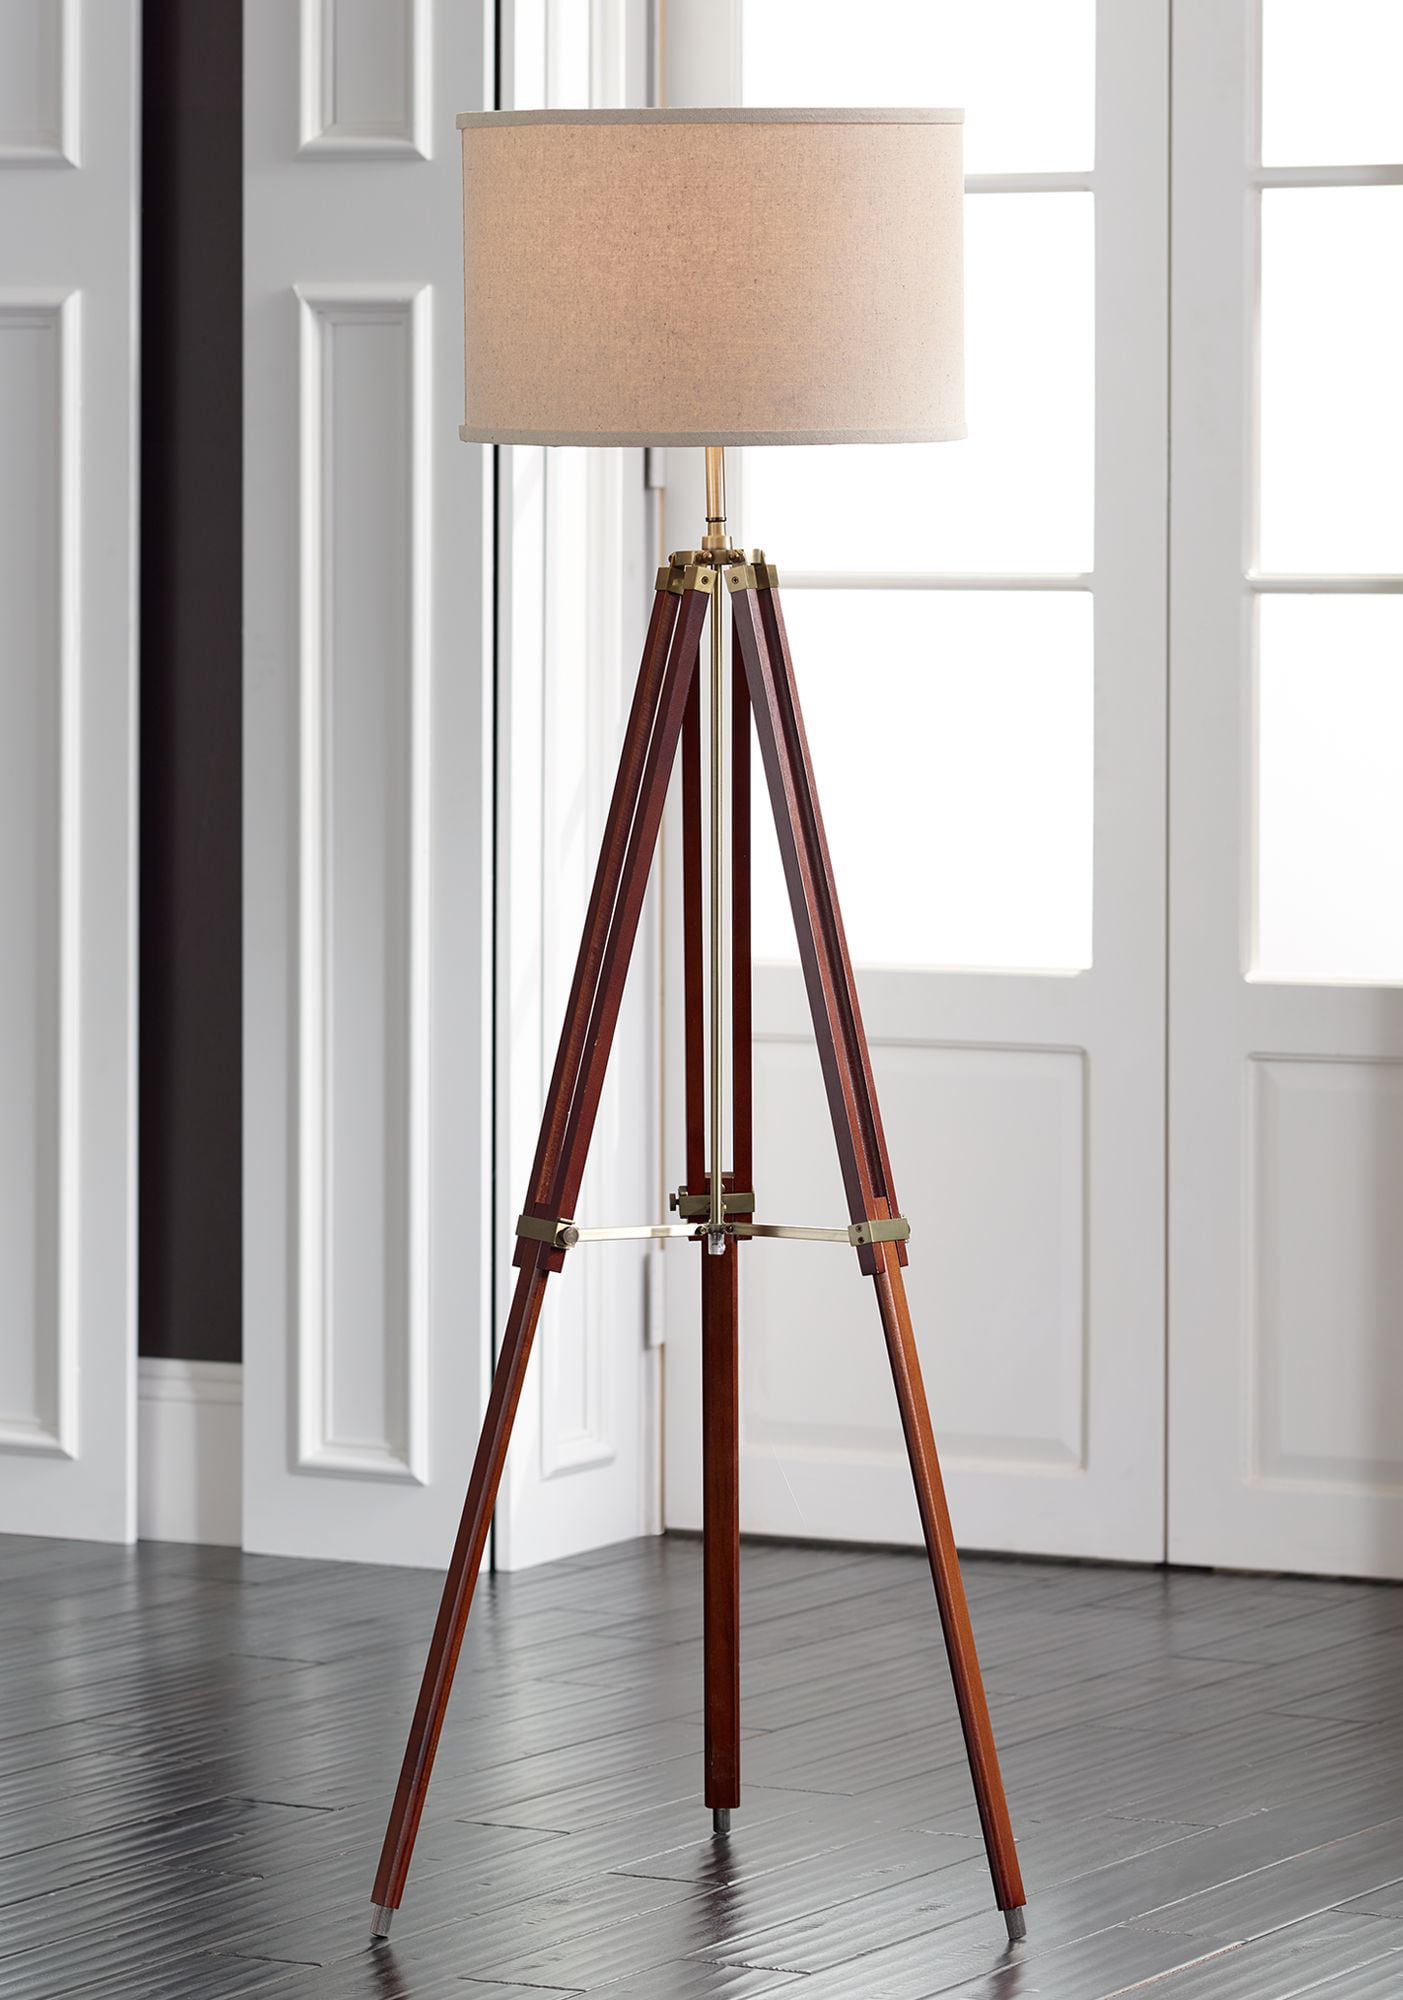 Details about   NAUTICAL DECORATIVE  FLOOR SHADE LAMP TRIPOD WOOD  BROWN STAND 